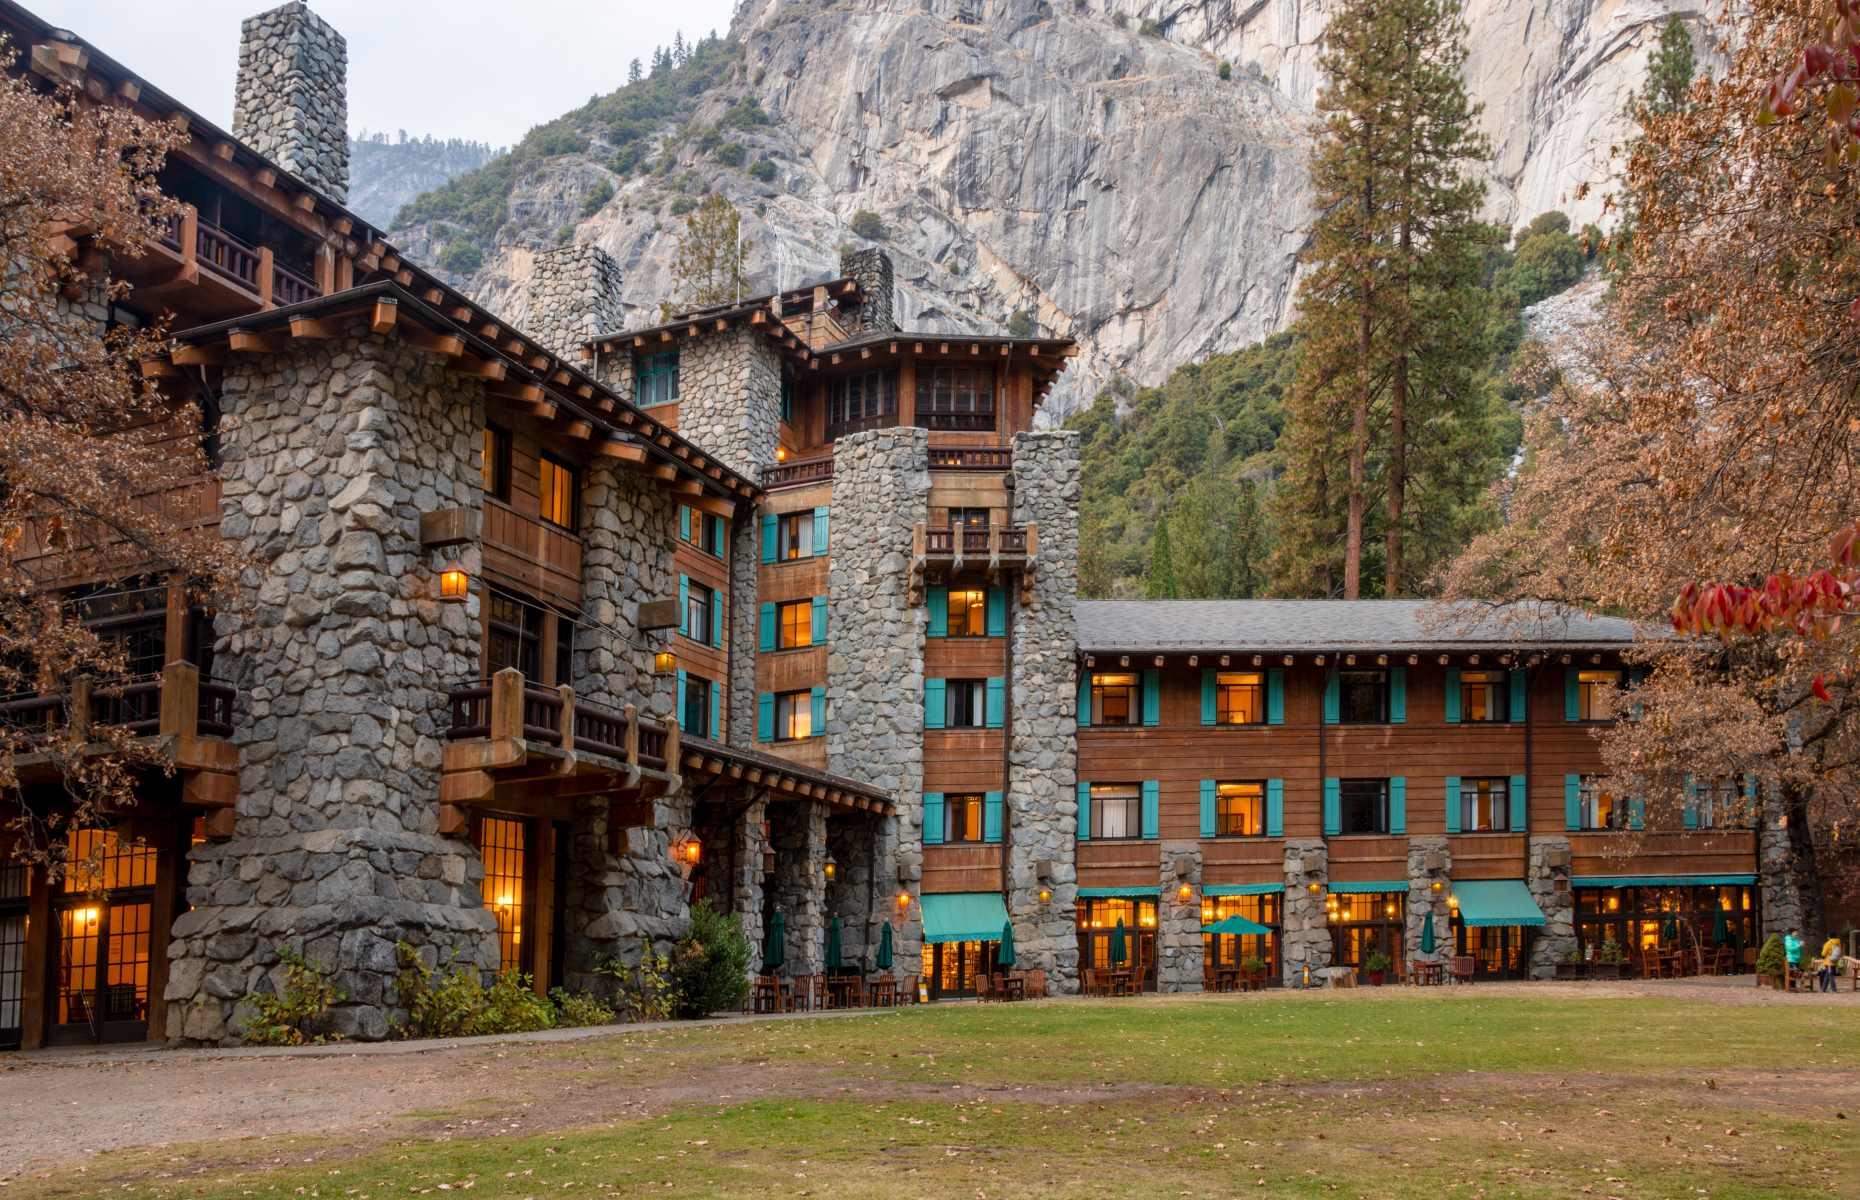 <p>Opened in the 1920s, the Ahwahnee Hotel has hosted presidents, monarchs and Hollywood stars in its time, as well as inspiring aspects of the Overlook Hotel in the film adaptation of Stephen King’s <em>The Shining</em>. Today's guests can book a stay in the Ahwahnee's Mary Curry Tresidder Suite, which is where the late Queen Elizabeth II stayed during her 1983 tour of California. The hotel was also used as a Second World War military hospital for those afflicted with shell shock.</p>  <p><strong>Liked this? Click on the Follow button above for more great stories from loveEXPLORING</strong></p>  <p><strong><a href="https://www.loveexploring.com/galleries/141965/the-oldest-hotel-in-your-state">Now read on to discover the oldest hotel in your state</a></strong></p>